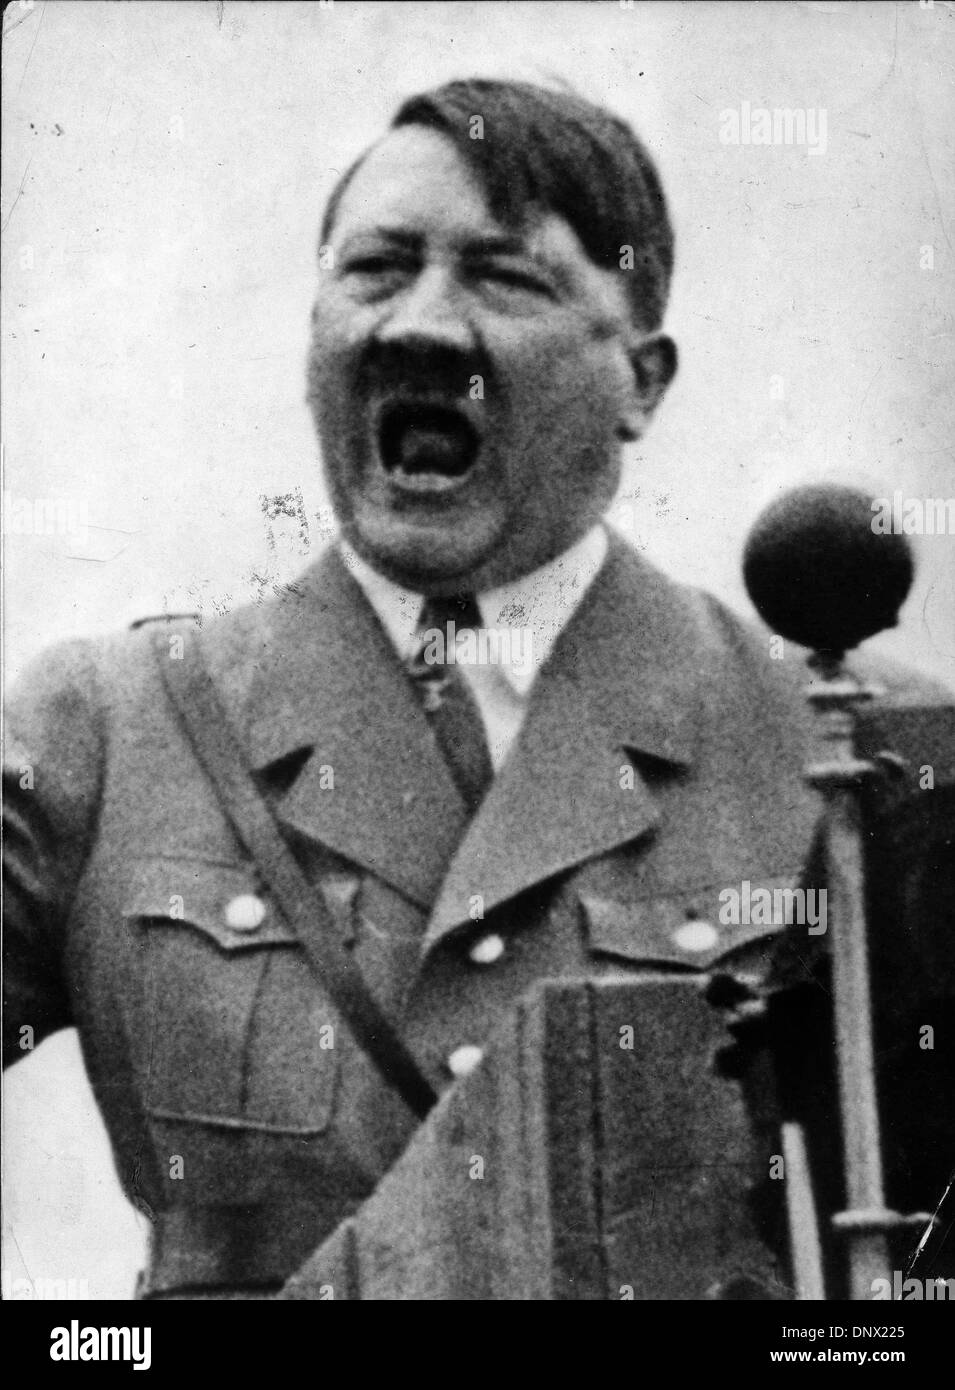 Aug. 5, 1939 - Berlin, Germany - Nazi leader and Fuhrer of Germany, ADOLF HITLER giving one of his powerful speeches sometime in 1939. (Credit Image: © KEYSTONE Pictures USA/ZUMAPRESS.com) Stock Photo